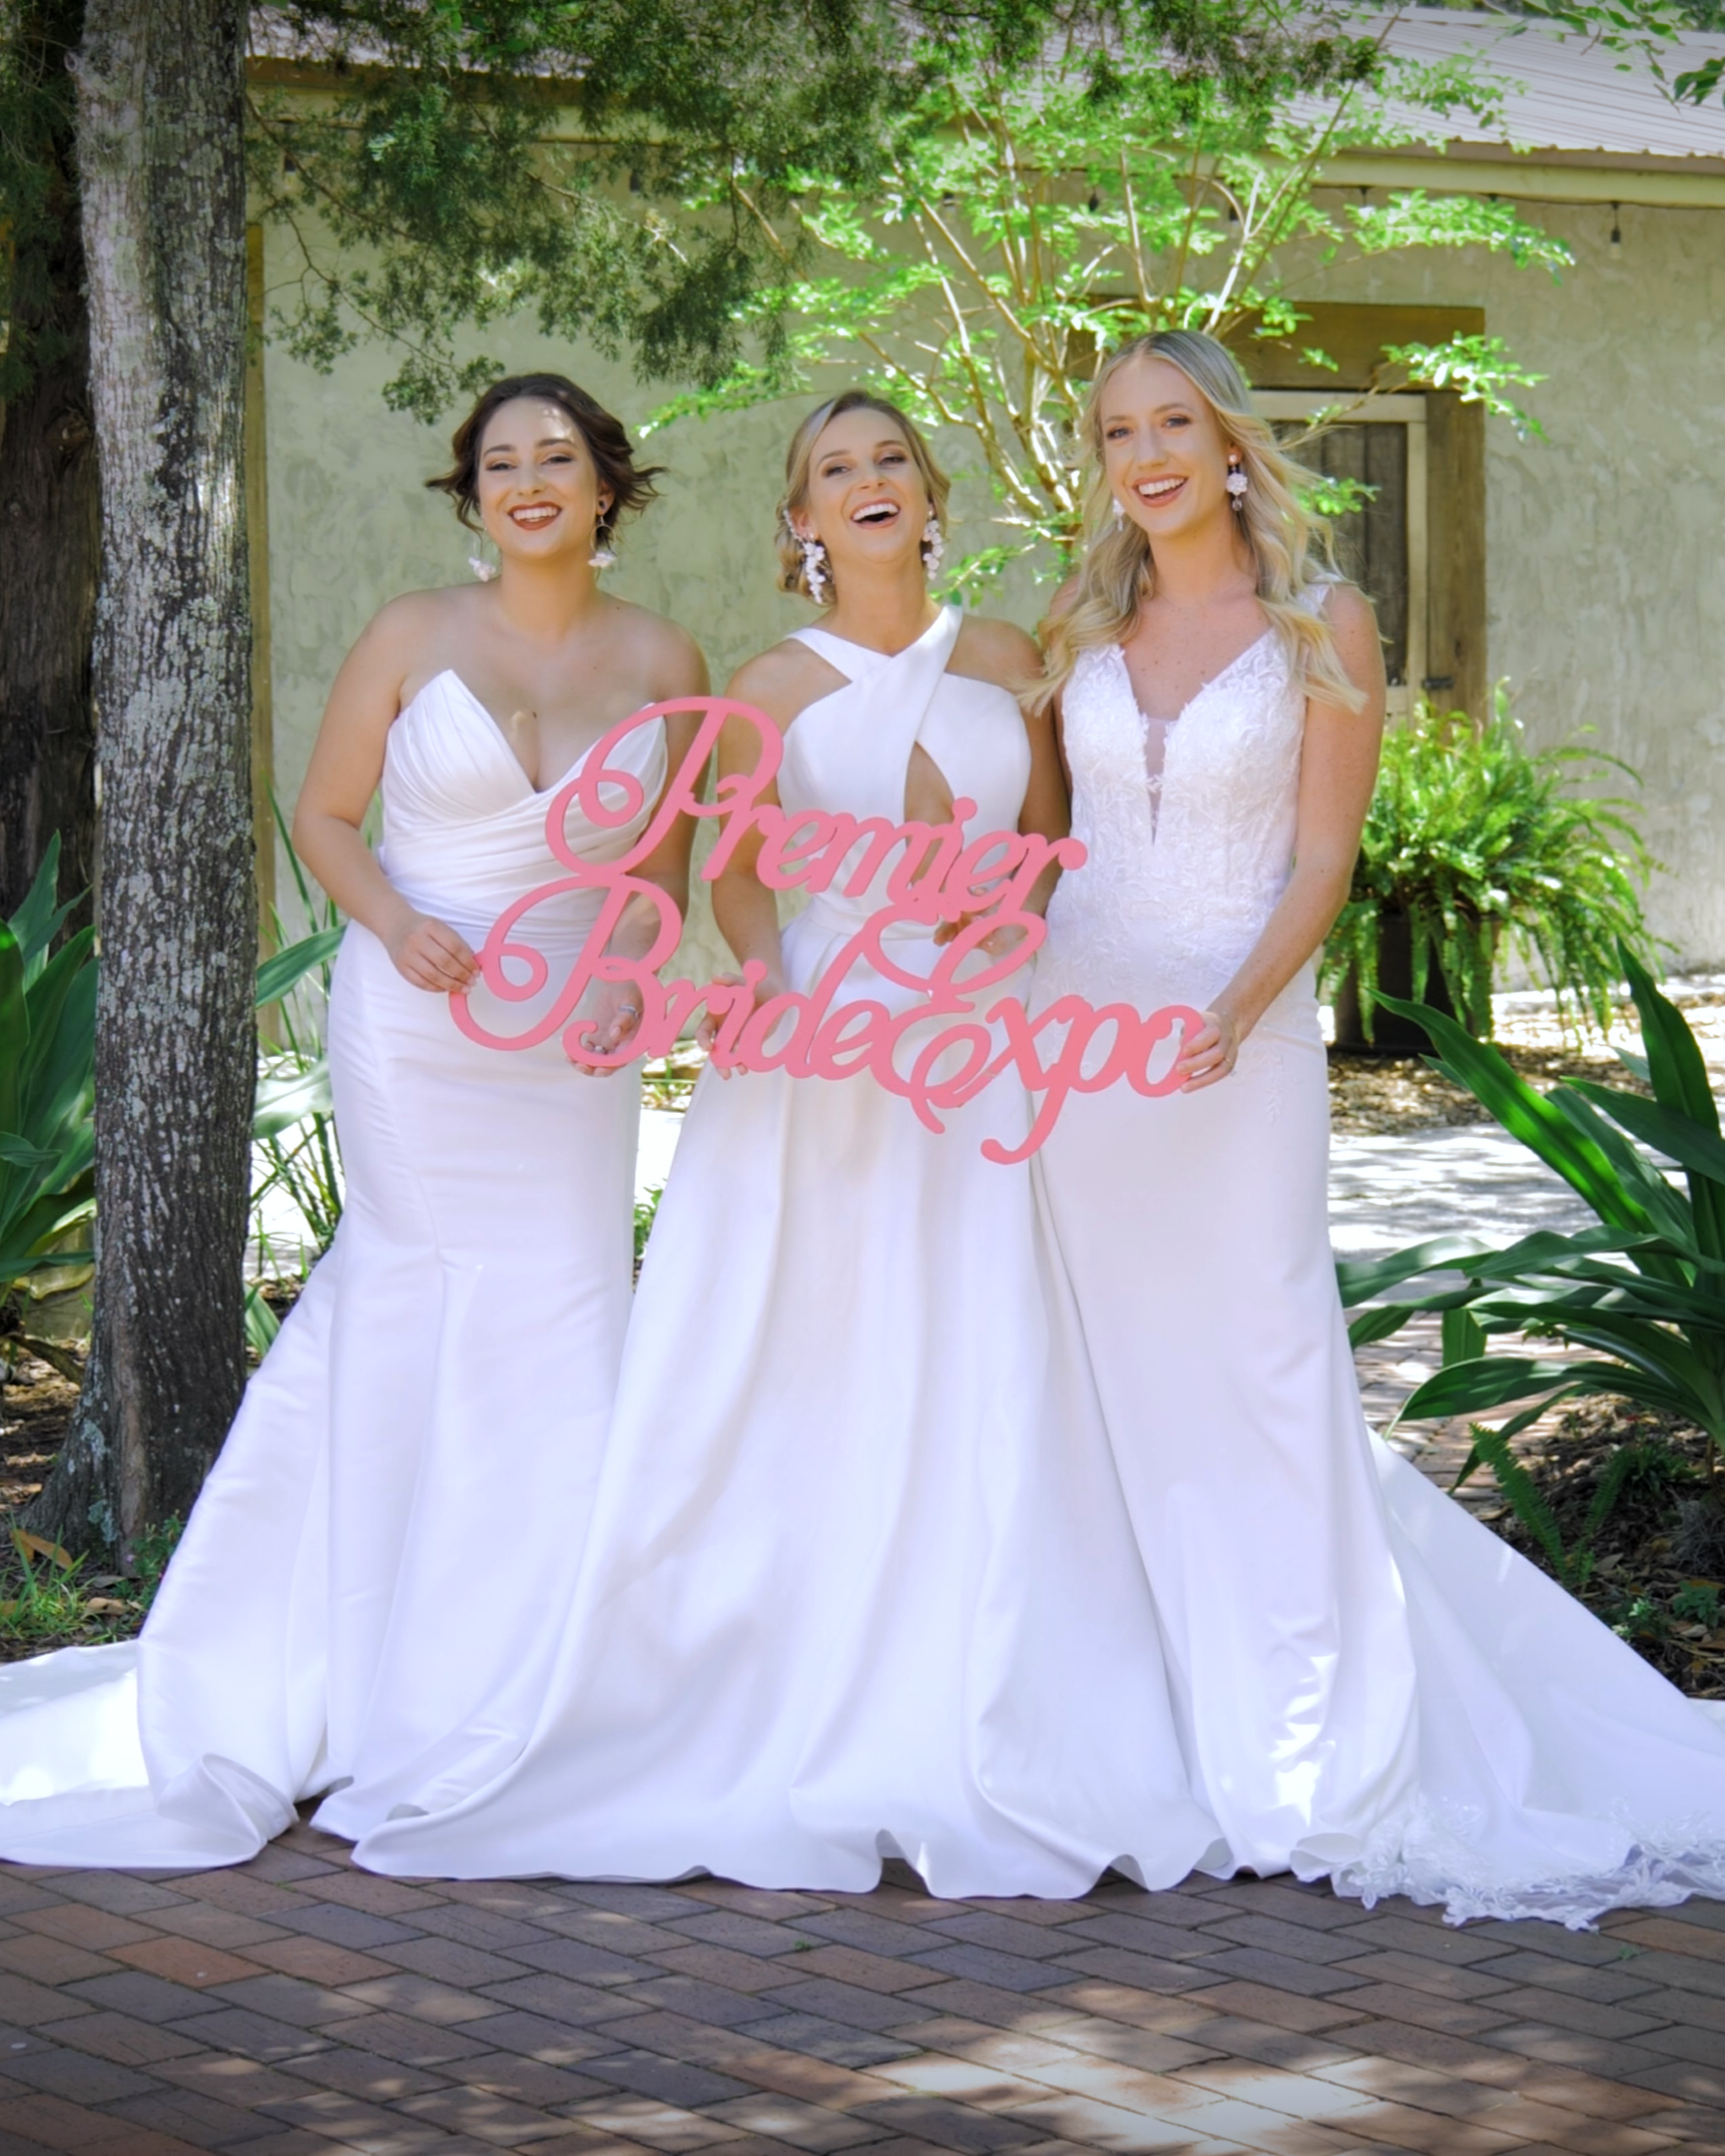 Premier Bride Expo St. Augustine Florida Photography and Videography